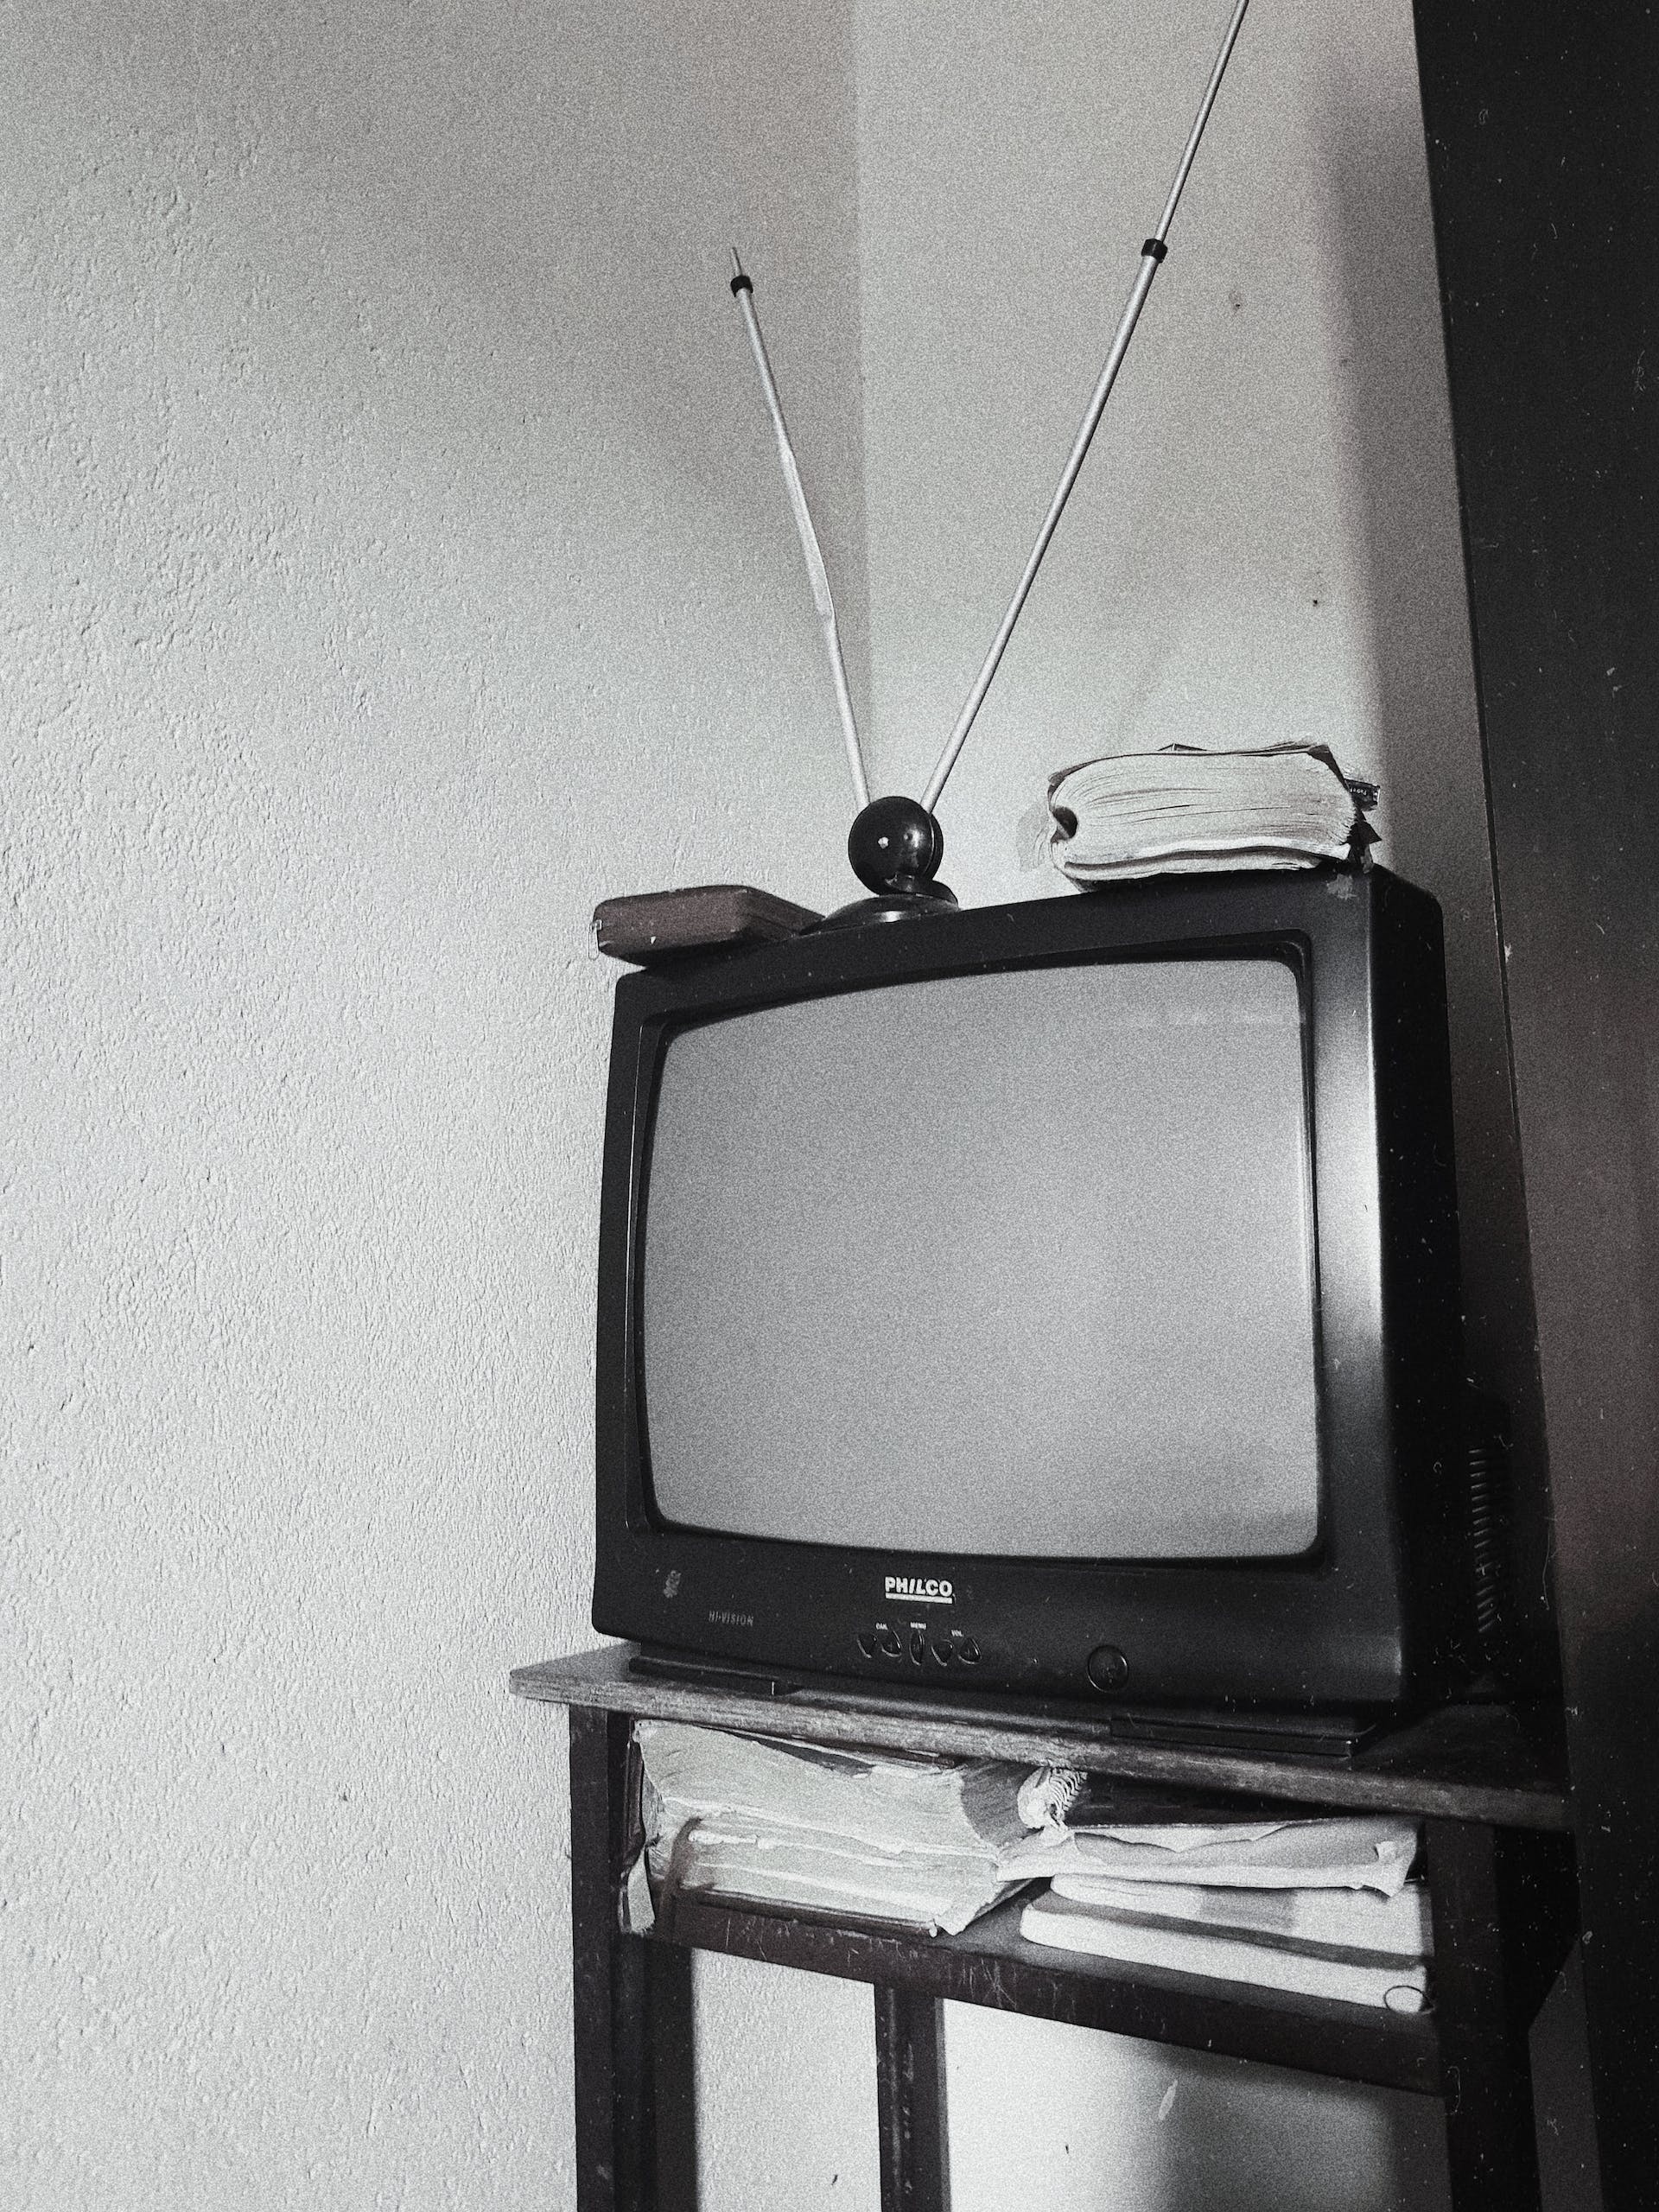 An old television | Source: Pexels